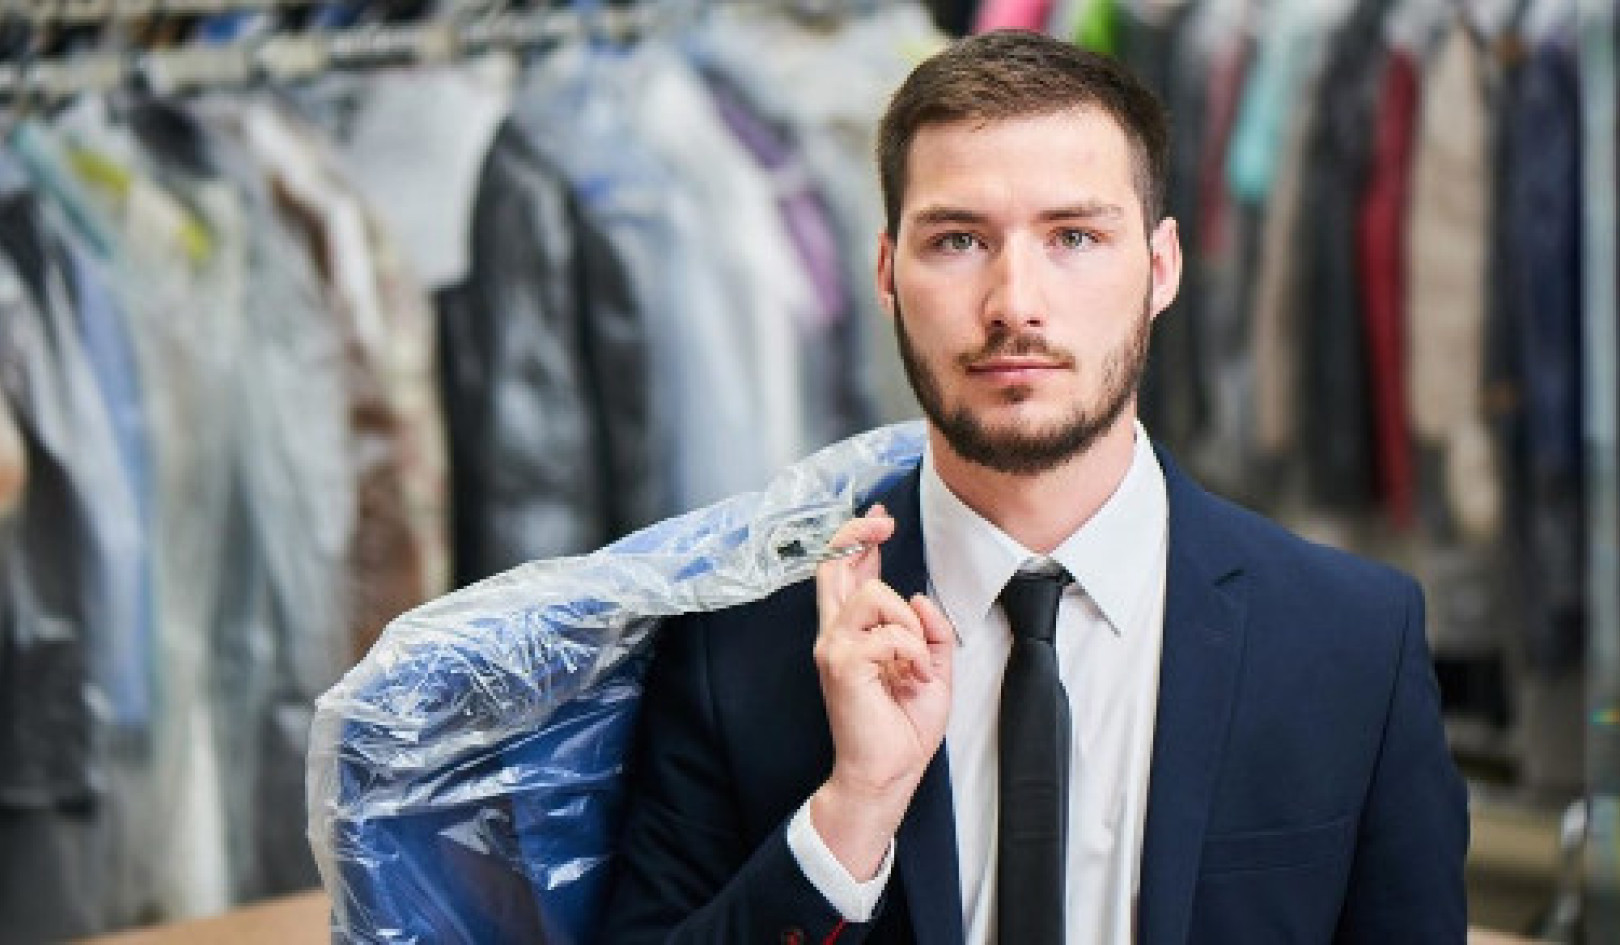 Dry Cleaning Chemical May Be a Cause of Parkinson’s